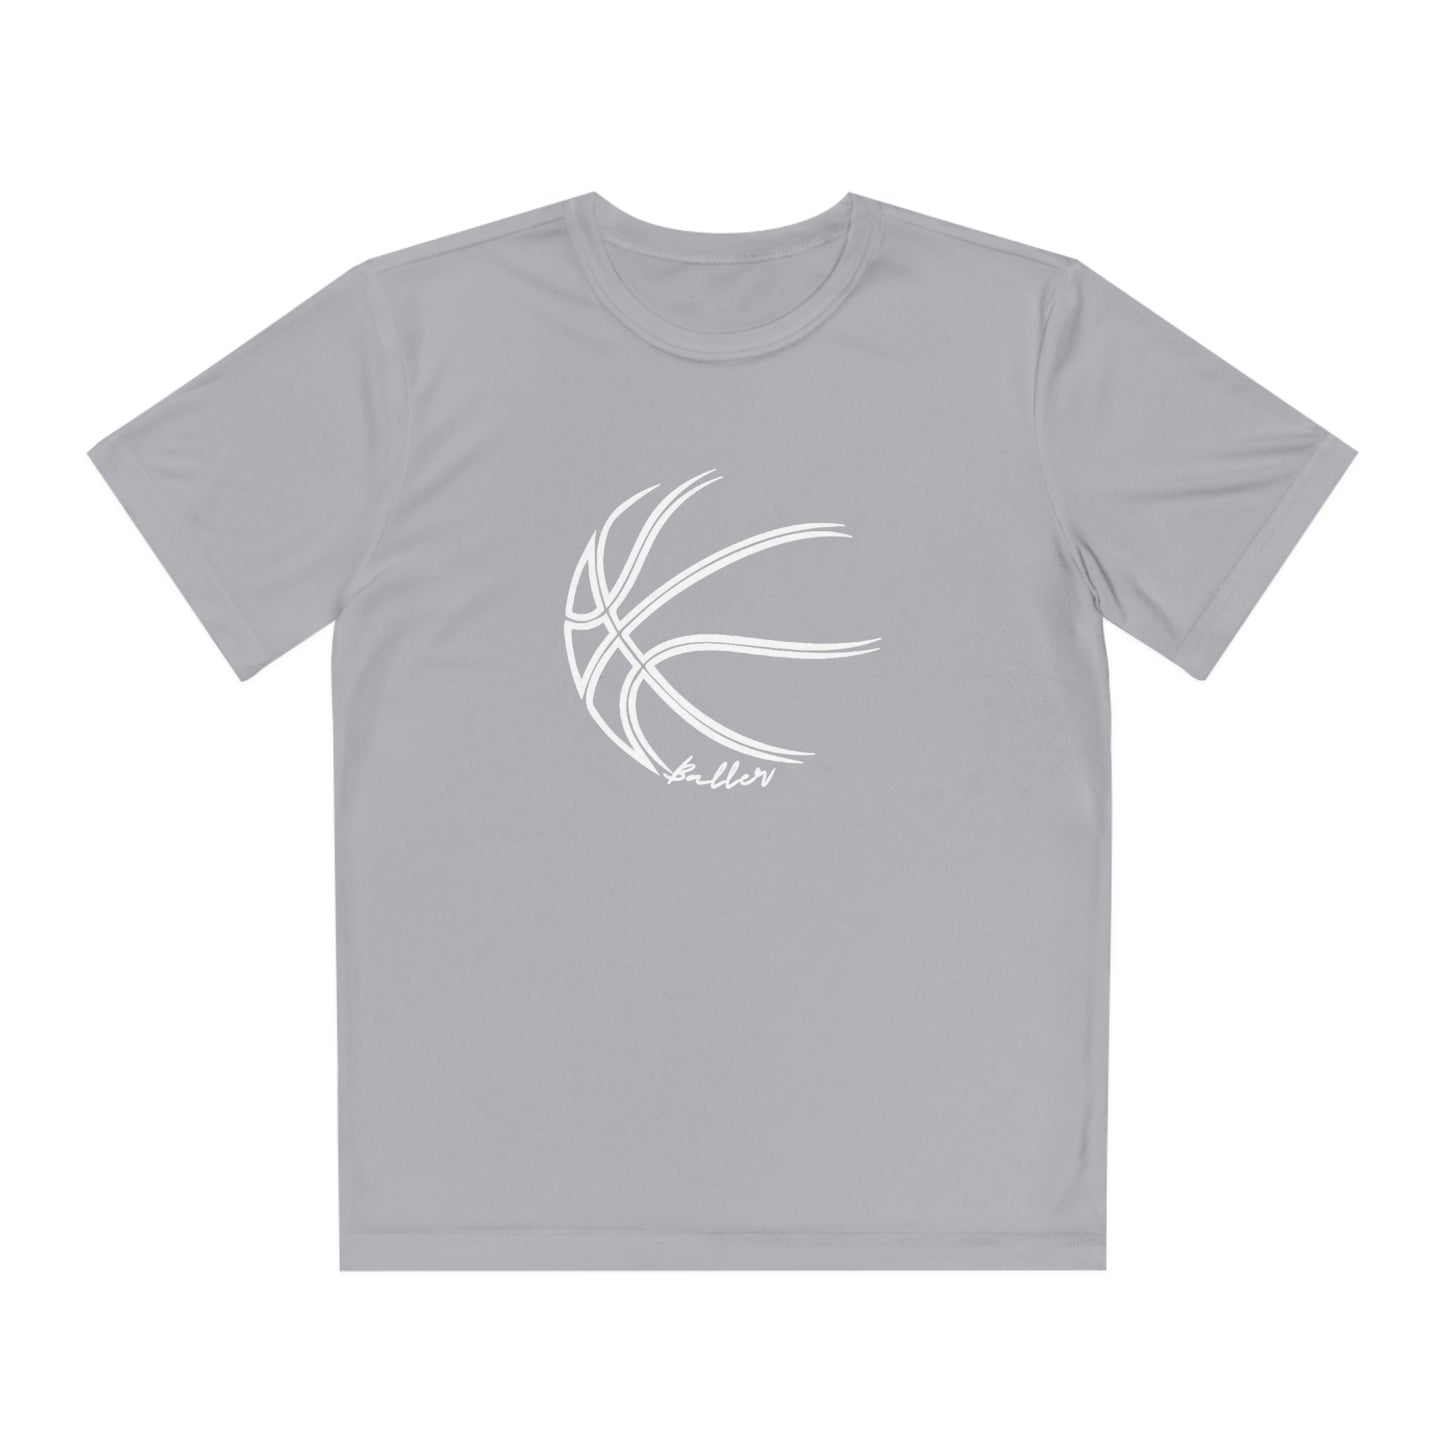 Baller - Youth Competitor Tee